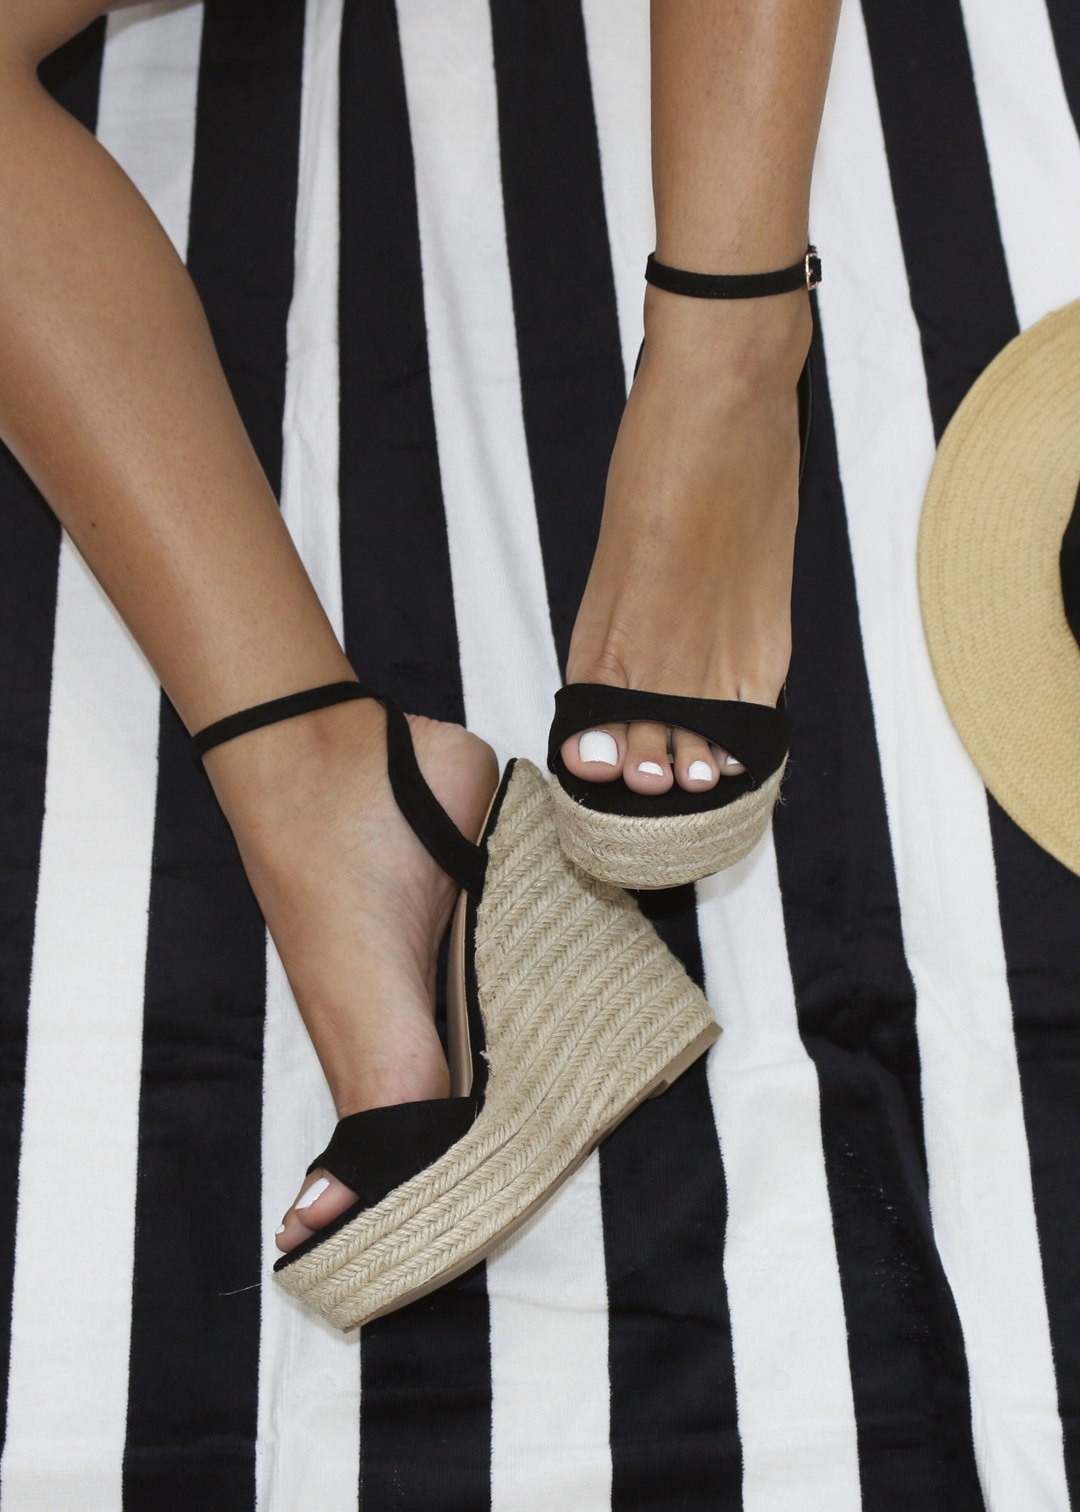 Alyssa B Espadrille Wedge in Black on a black and white beach towel. Alyssa B is a show stopper for any pool party.